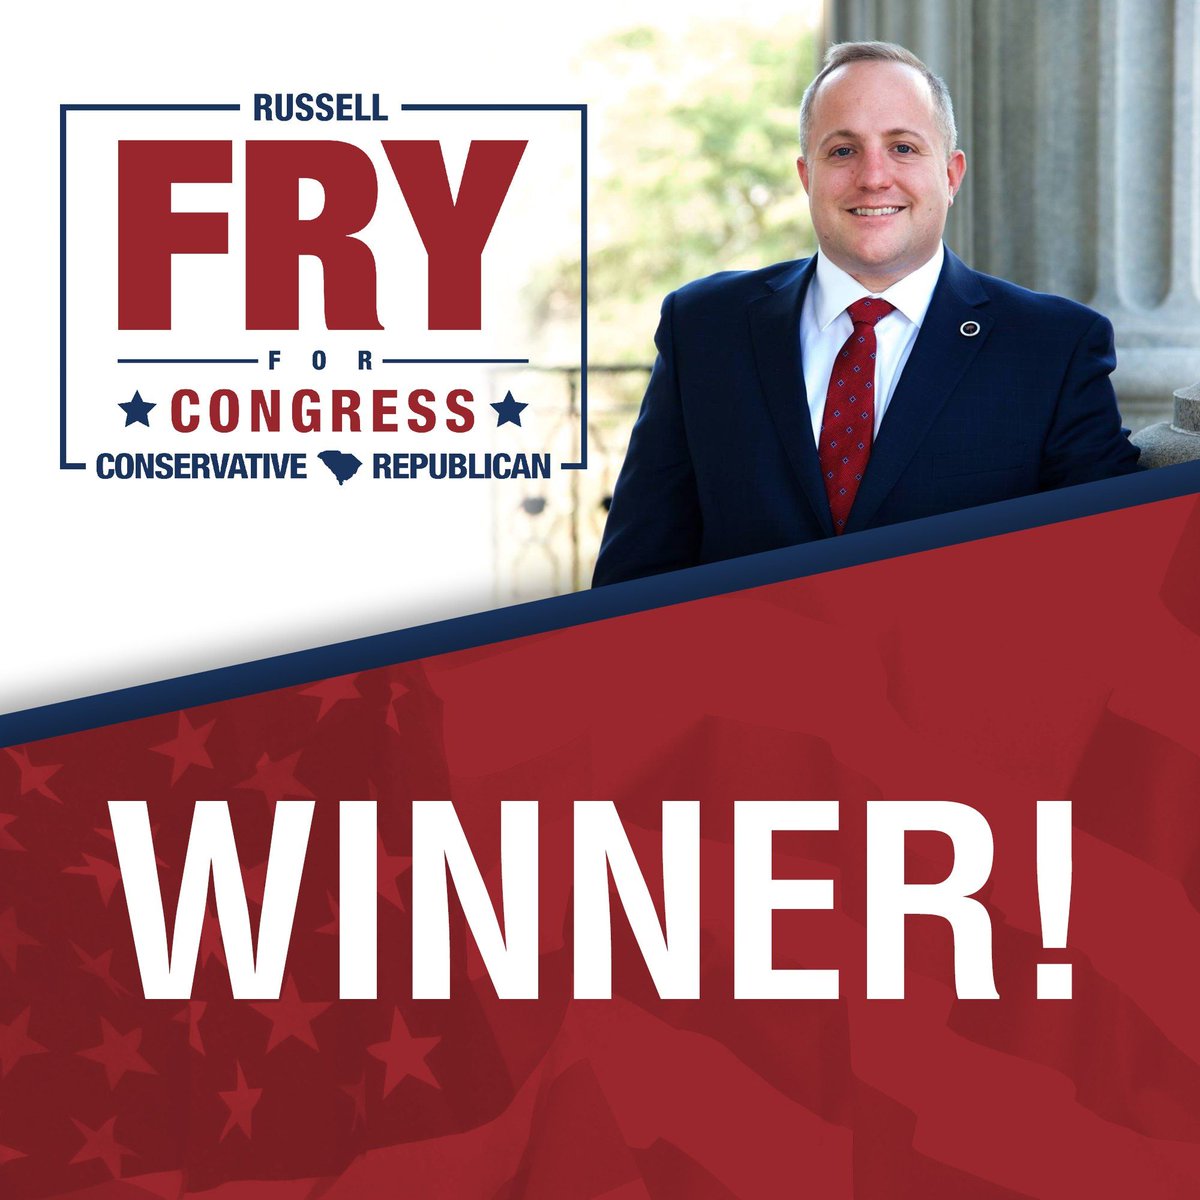 Congrats to our friend and client @RussellFrySC on winning South Carolina's 7th Congressional District! Can't wait to have you in Congress.